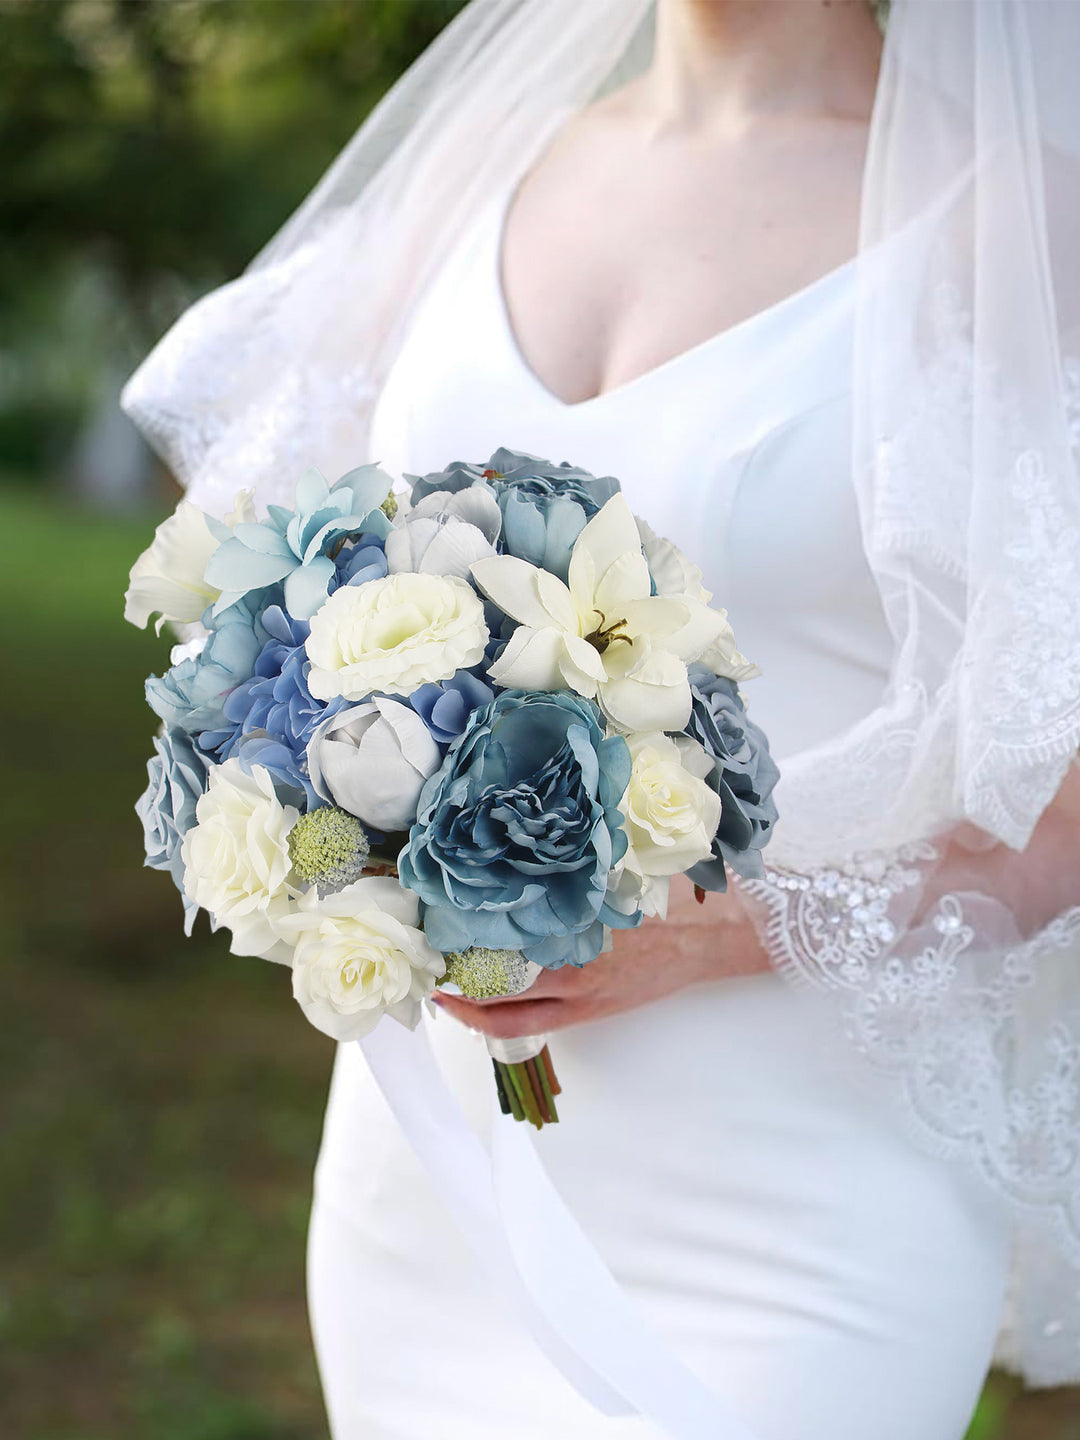 What Does The Color Blue Mean In A Wedding? - Rinlong Flower